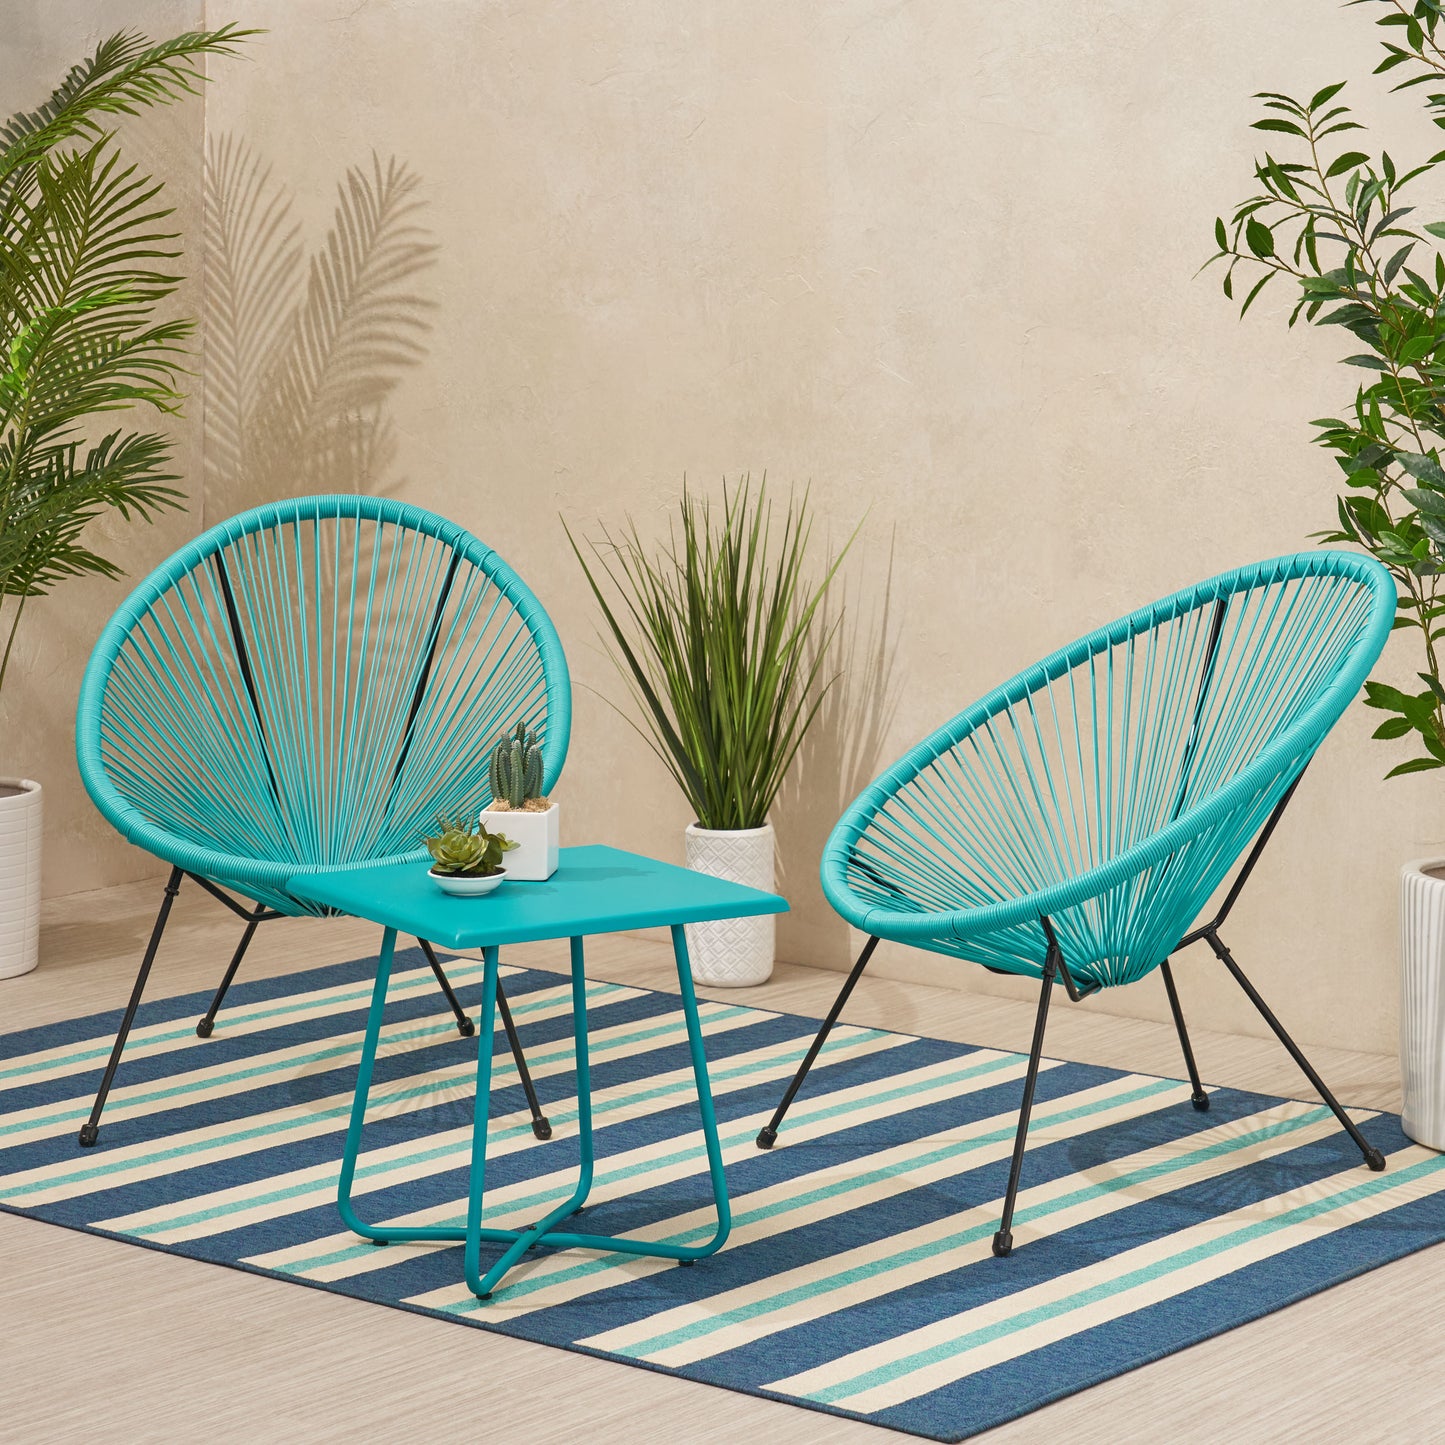 Sale Furniture Alexis Outdoor Woven Chair Teal+Black (Set of 2)